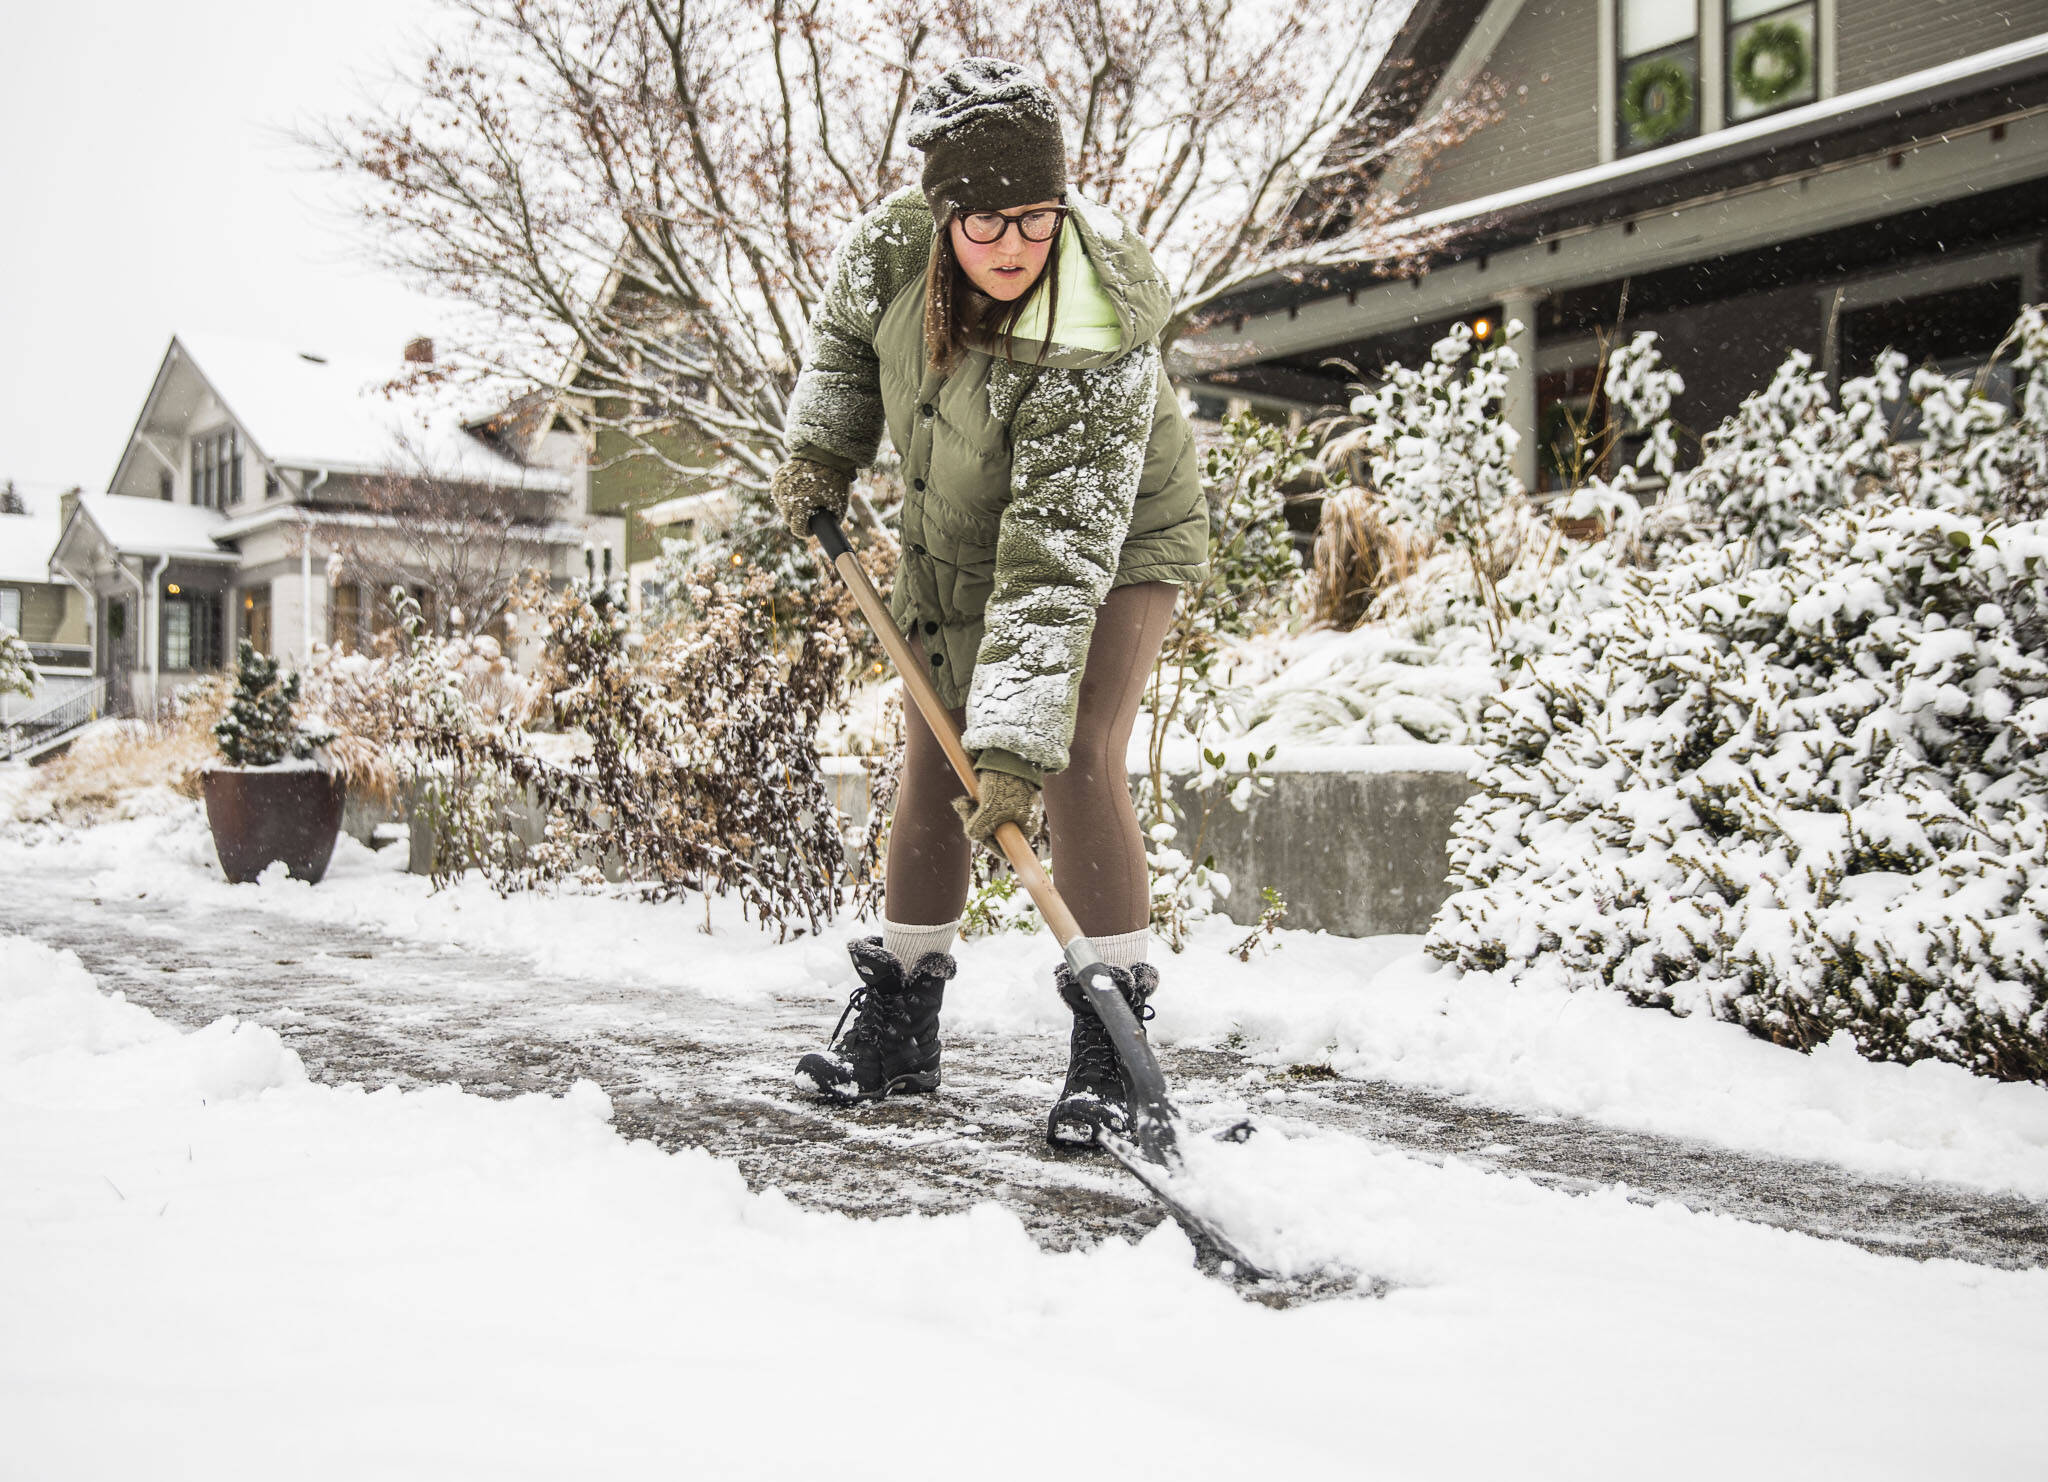 Carly McGinn shovels the sidewalk in front of her home as snow falls on Tuesday, in Everett. (Olivia Vanni / The Herald)